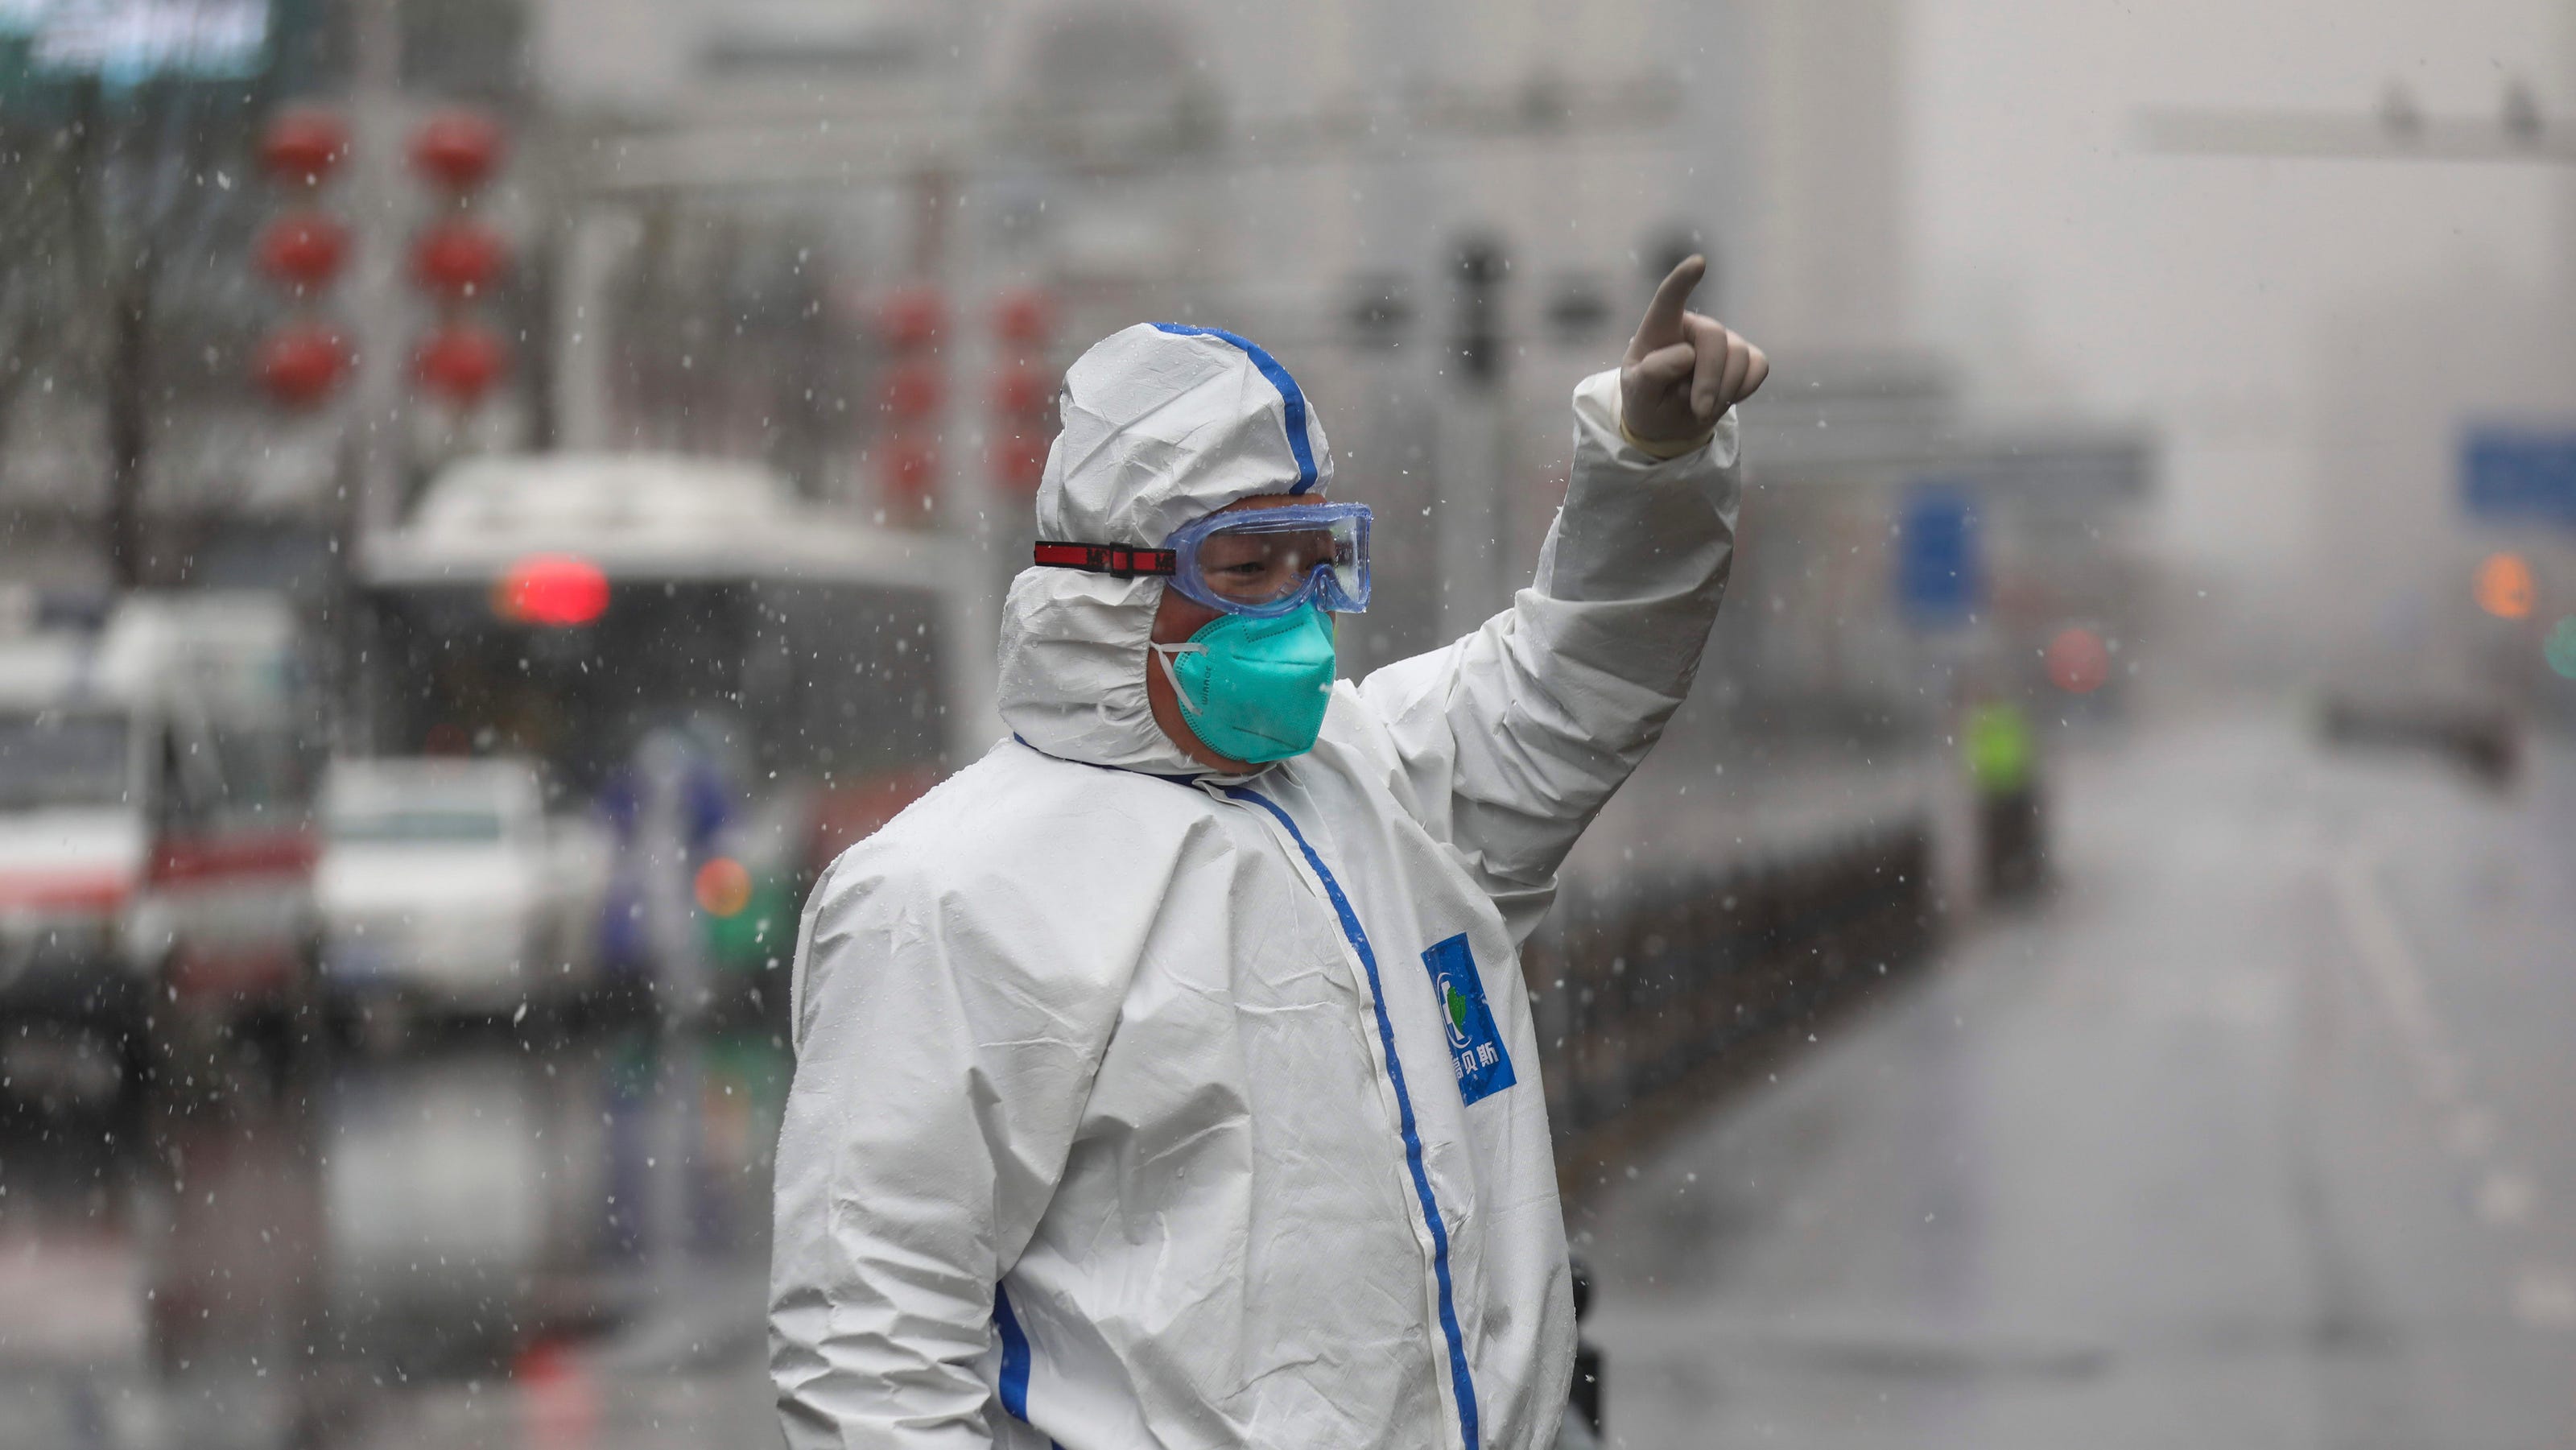 Coronavirus: France reports death of Chinese tourist, first in Europe